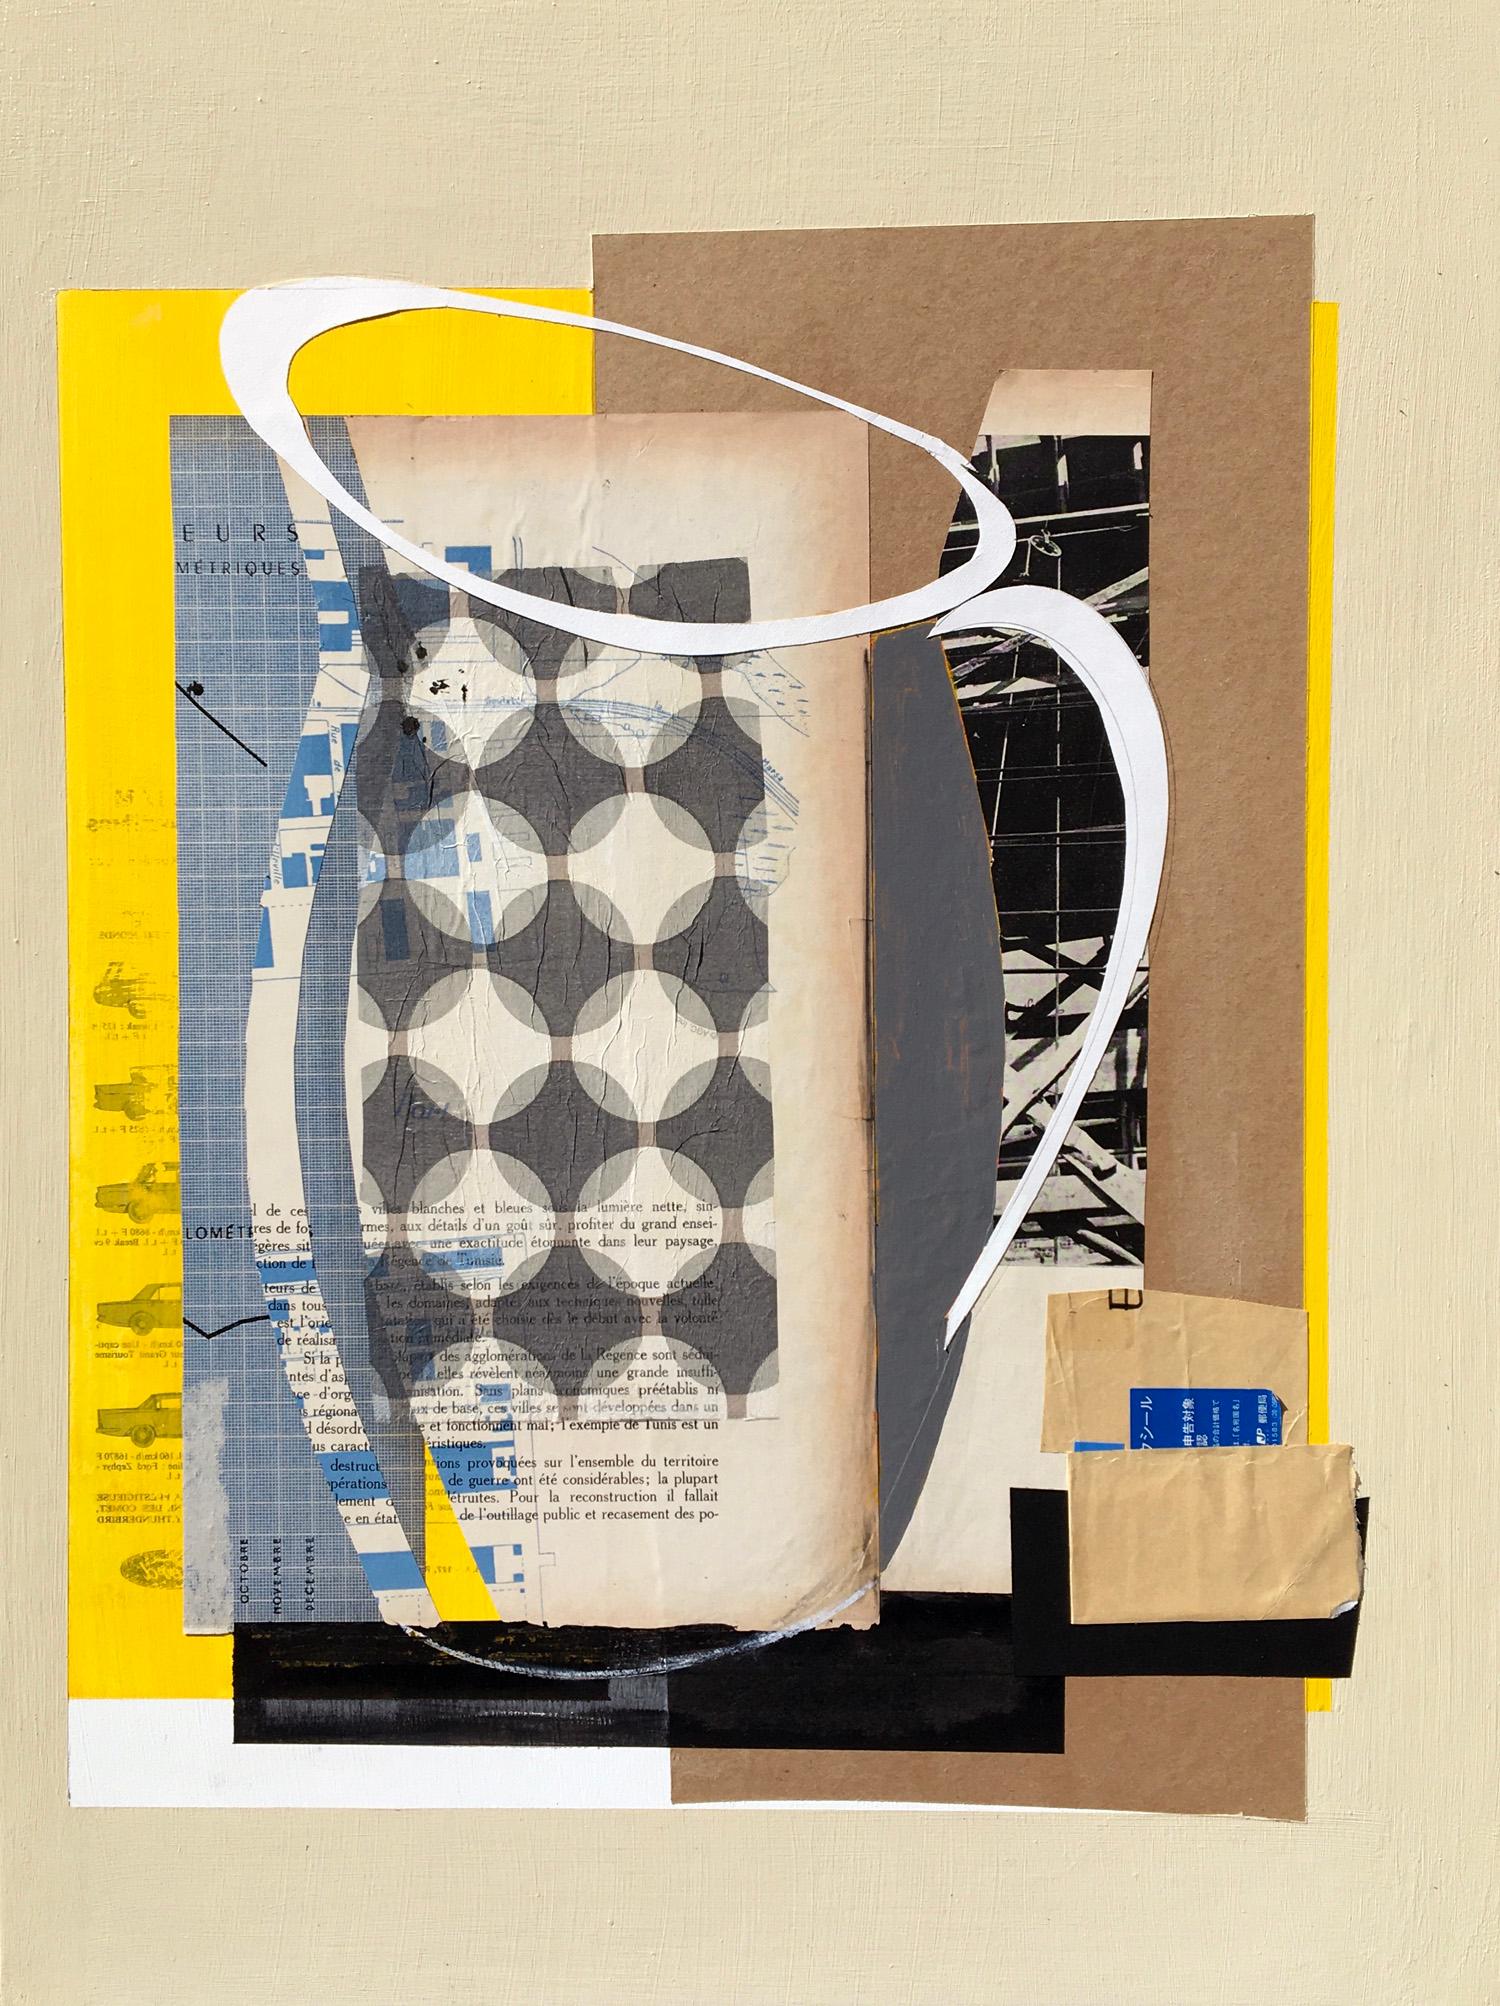 White Pitcher, still life, mixed media, collage, assembly, found art,  - Mixed Media Art by Eric Bohr